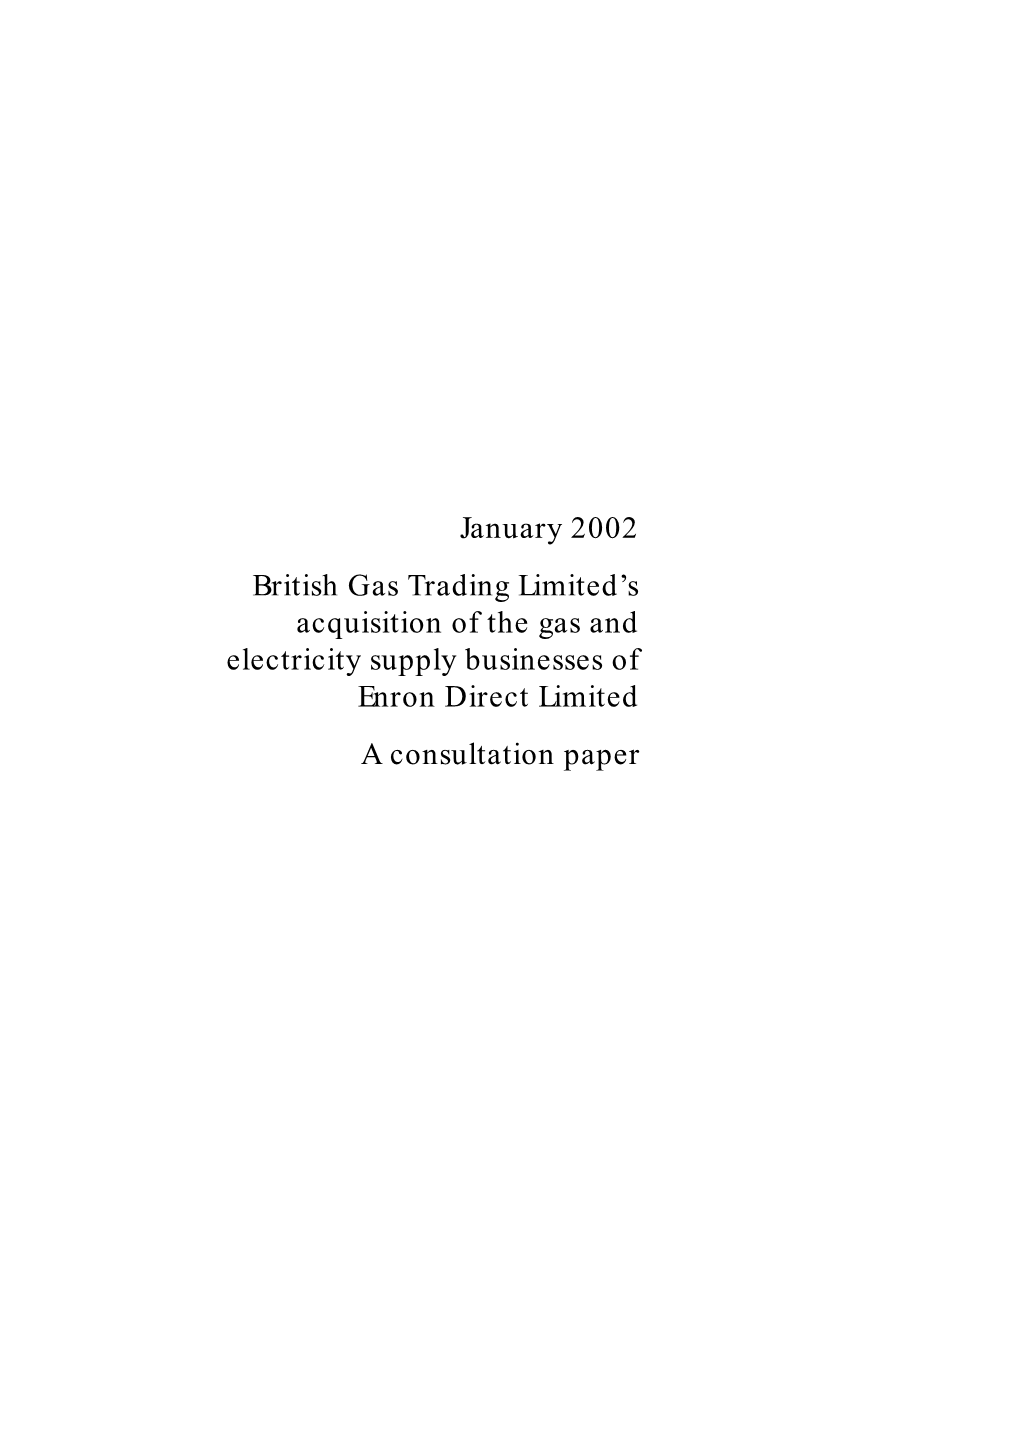 January 2002 British Gas Trading Limited's Acquisition of the Gas And